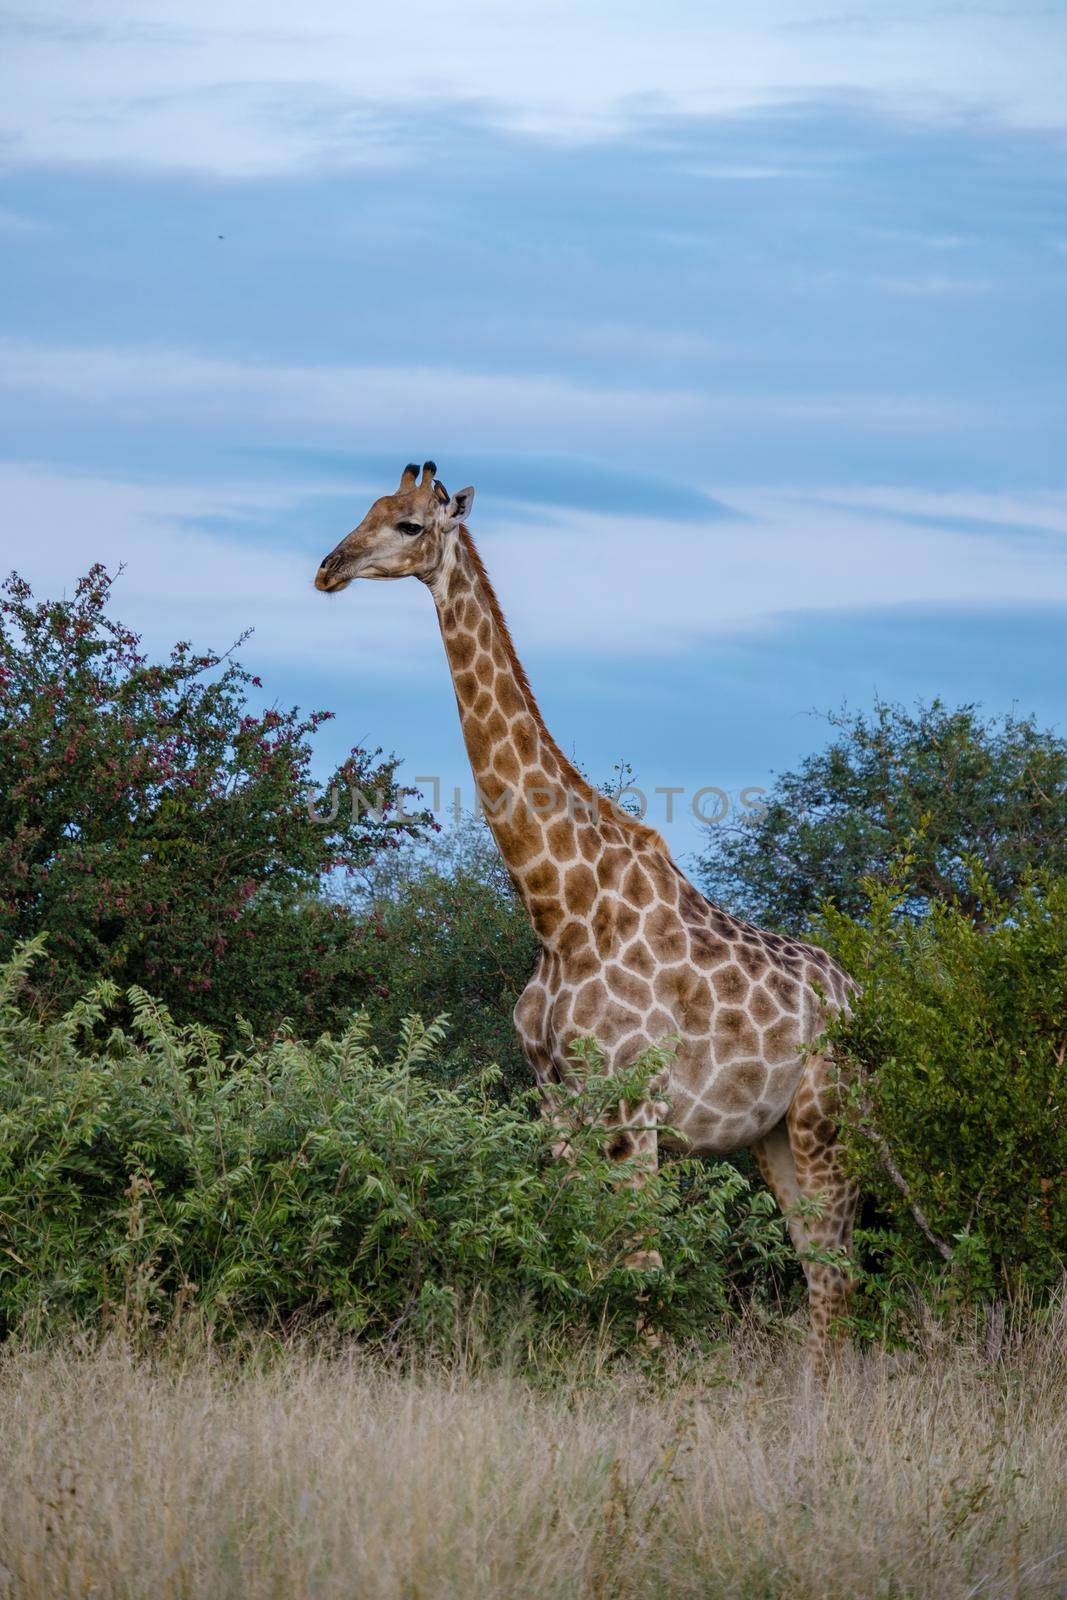 Giraffe at a Savannah landscape during sunset in South Africa at The Klaserie Private Nature Reserve inside the Kruger national park South Africa by fokkebok